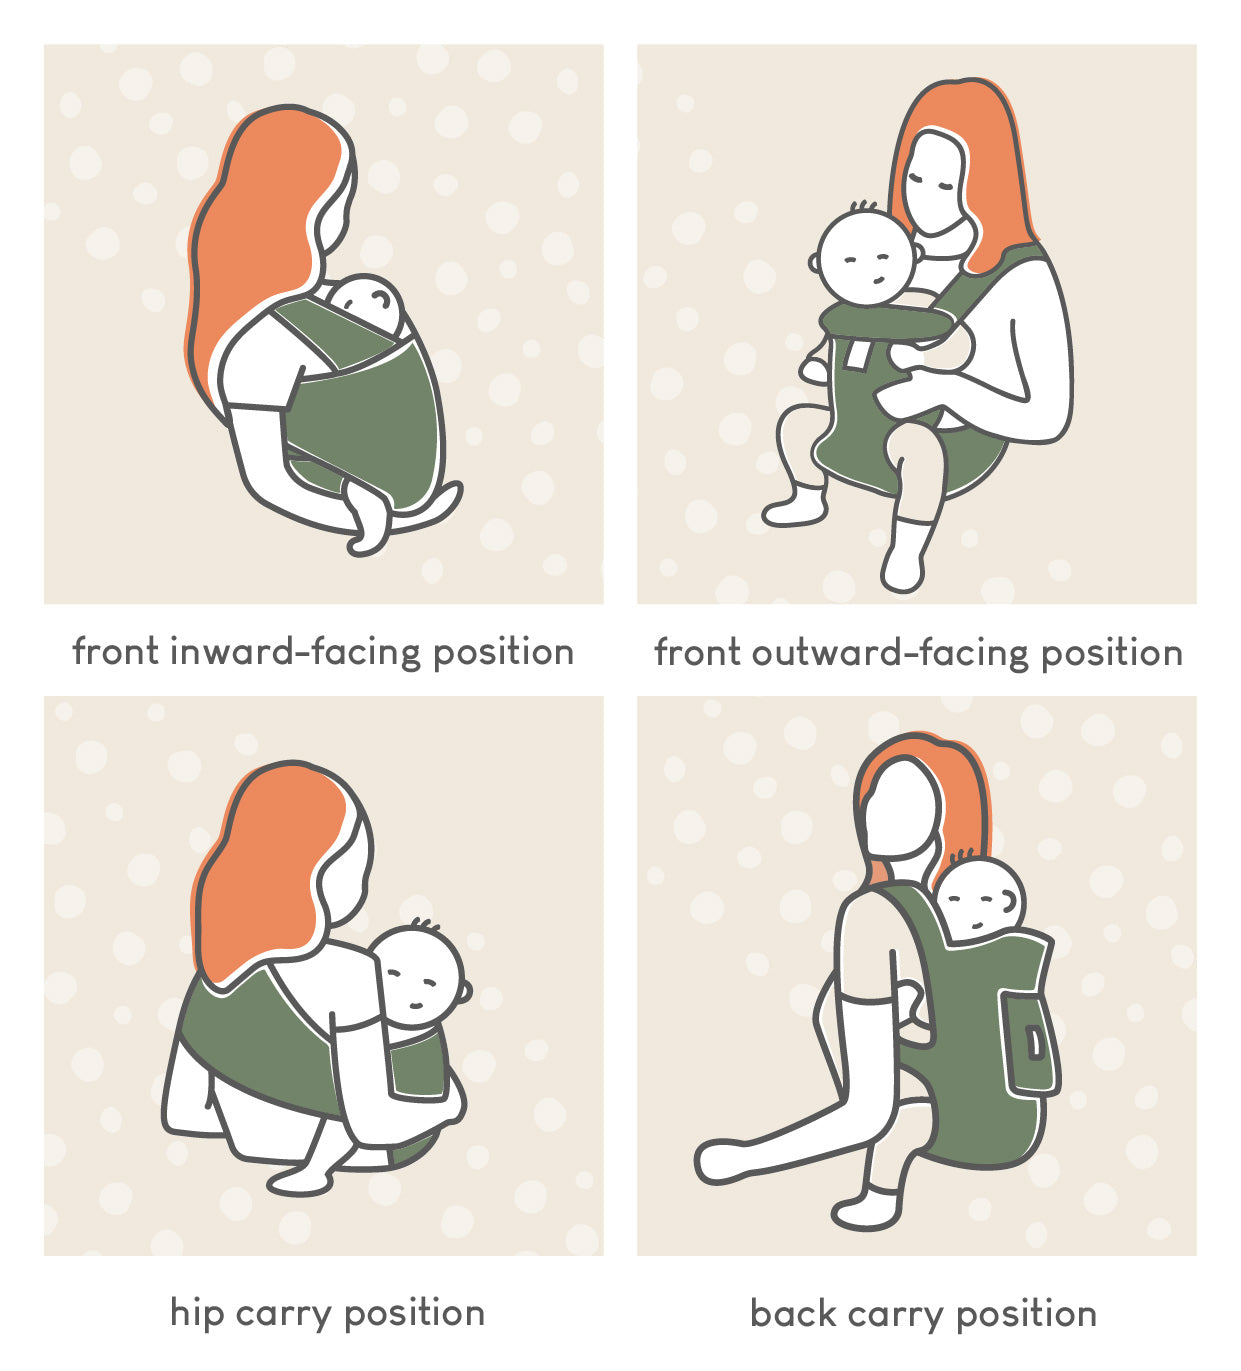 The four most common carrying positions in babywearing are the front inward-facing position, the front outward-facing position, the hip carry position, and the back carry position. 